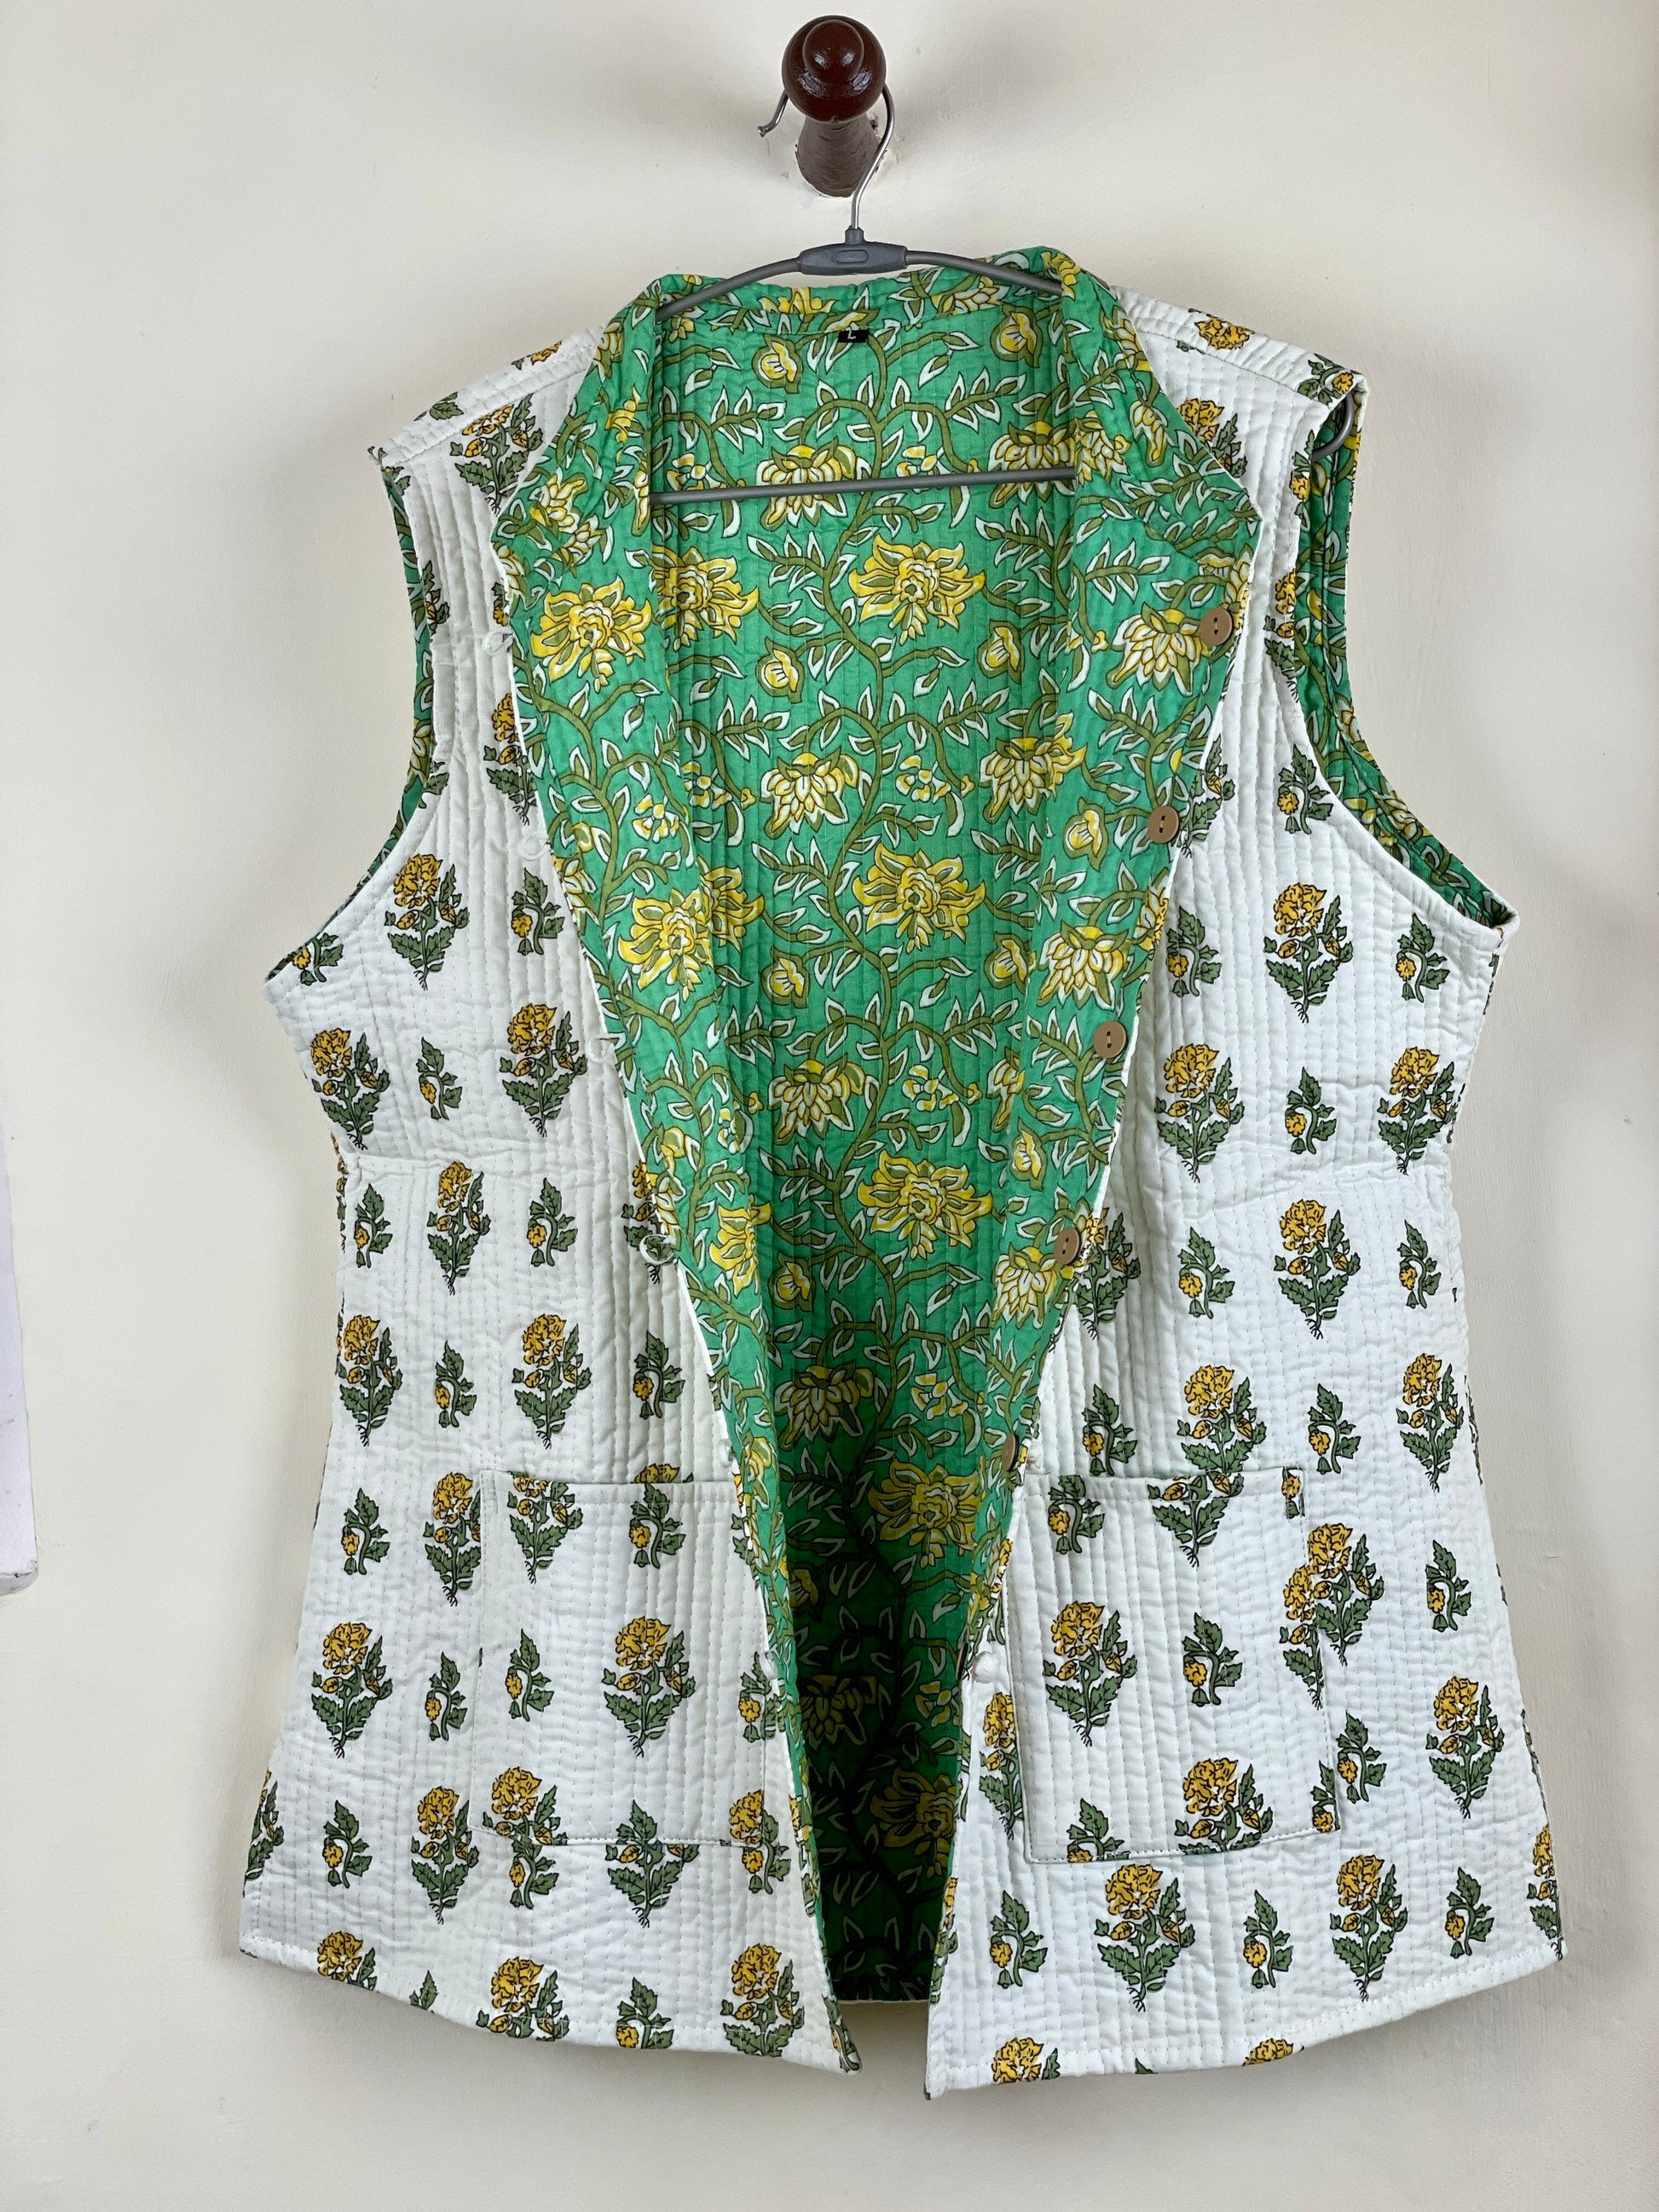 Indian Handmade Quilted Cotton Fabric Jacket Stylish White & Green Floral Women's Sleeveless Vest, Reversible Waistcoat for Her